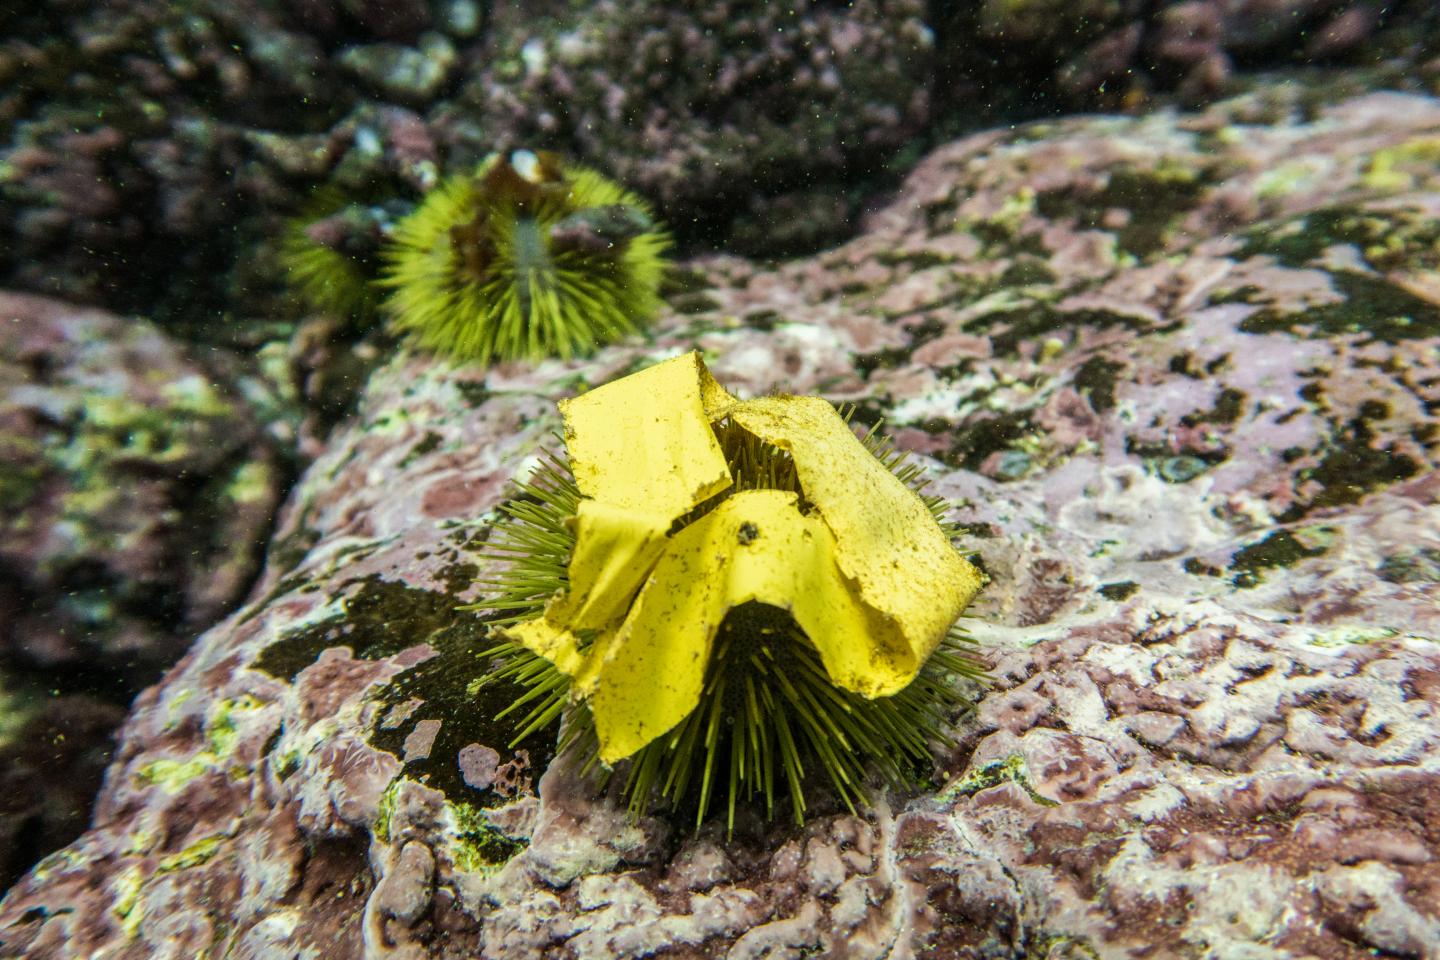 A piece of plastic tape found lying on an urchin